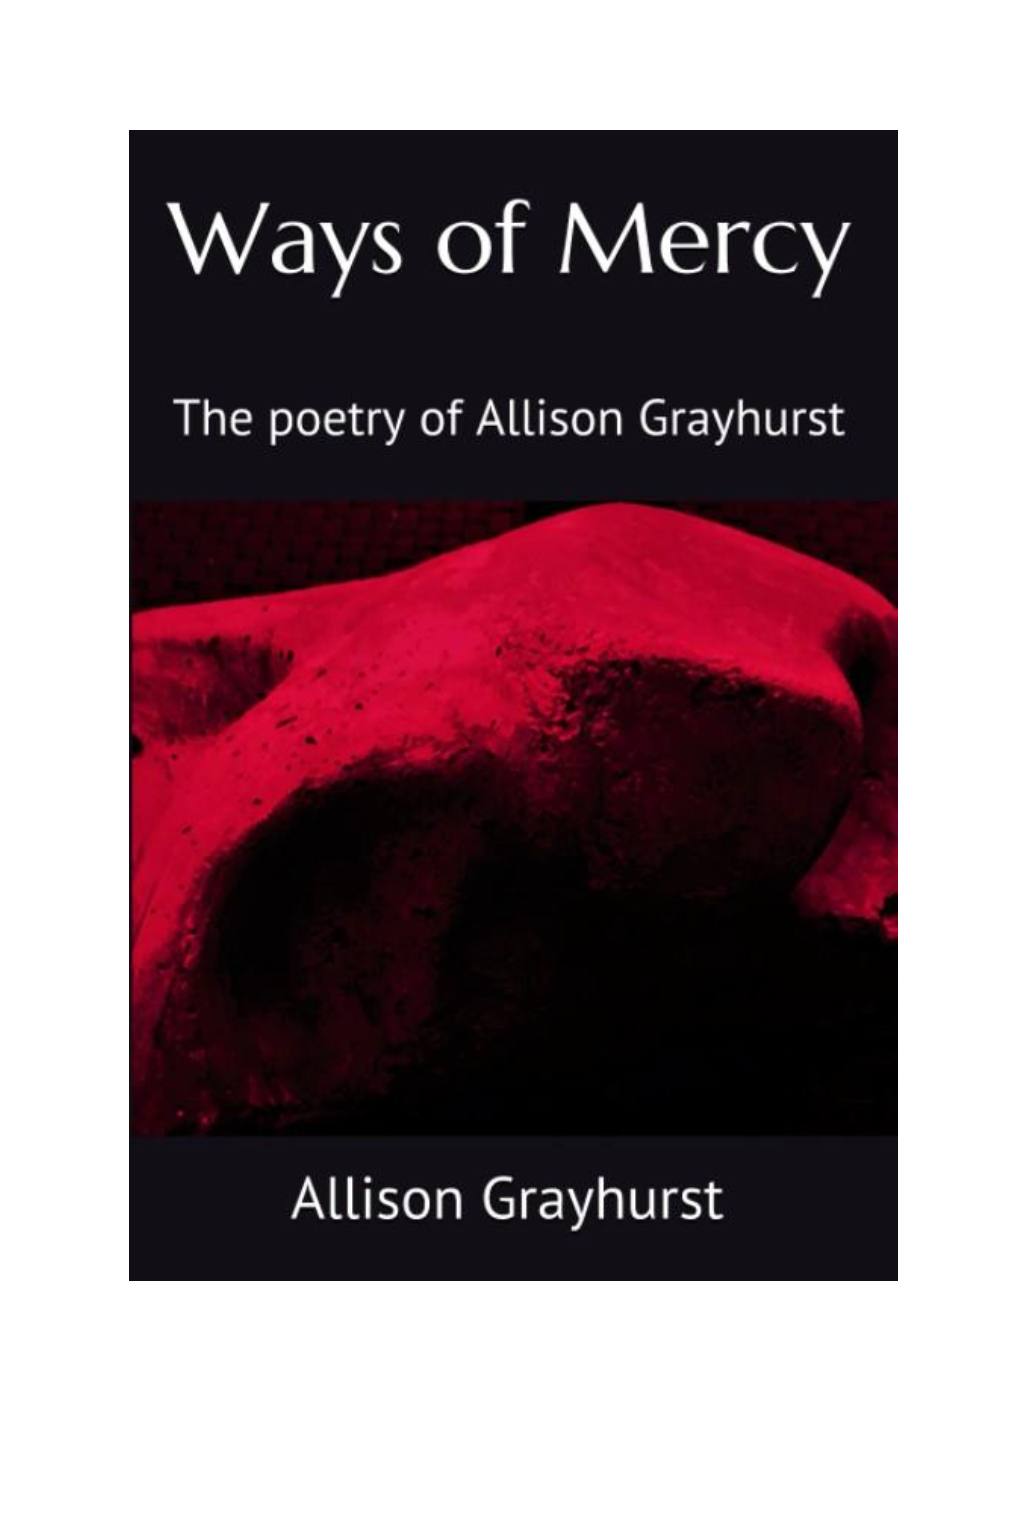 The Poetry of Allison Grayhurst Copyright © 2021 by Allison Grayhurst First Addition All Rights Reserved